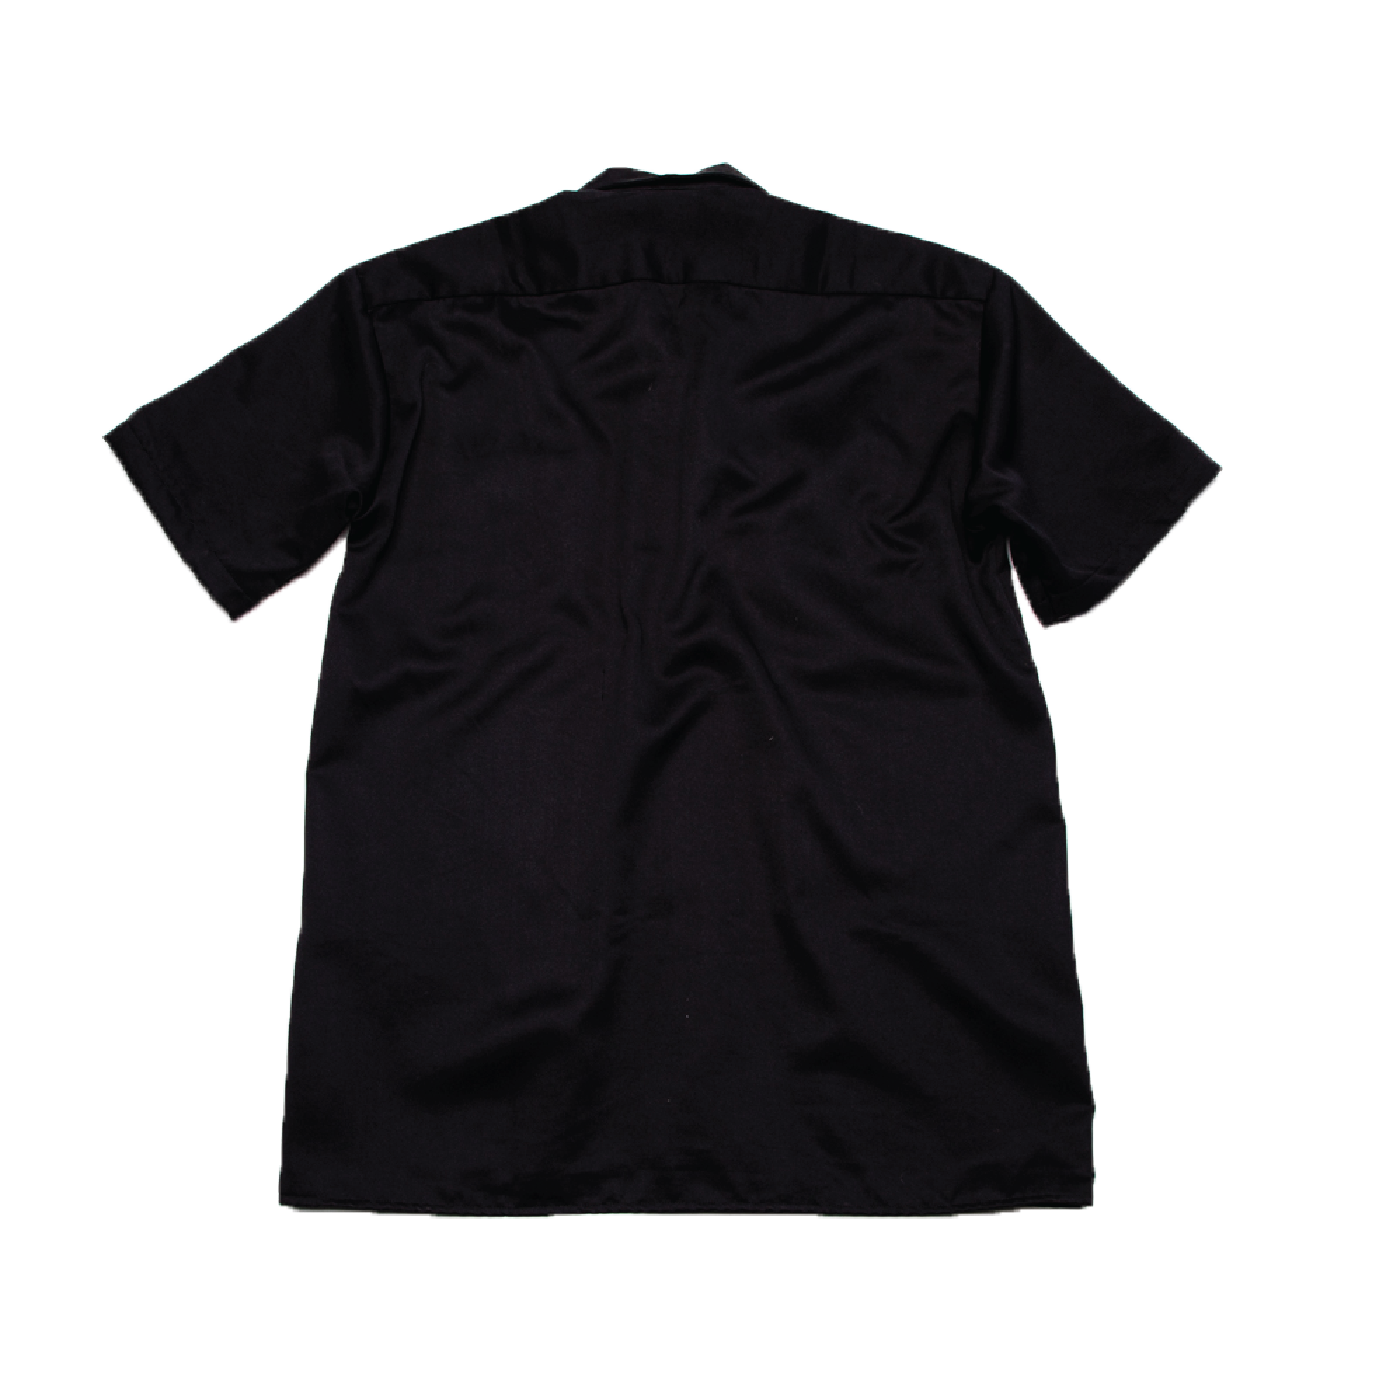 Thomas Surfboards & Captain Sip Sops Colab Stay Bold Work Shirt Black